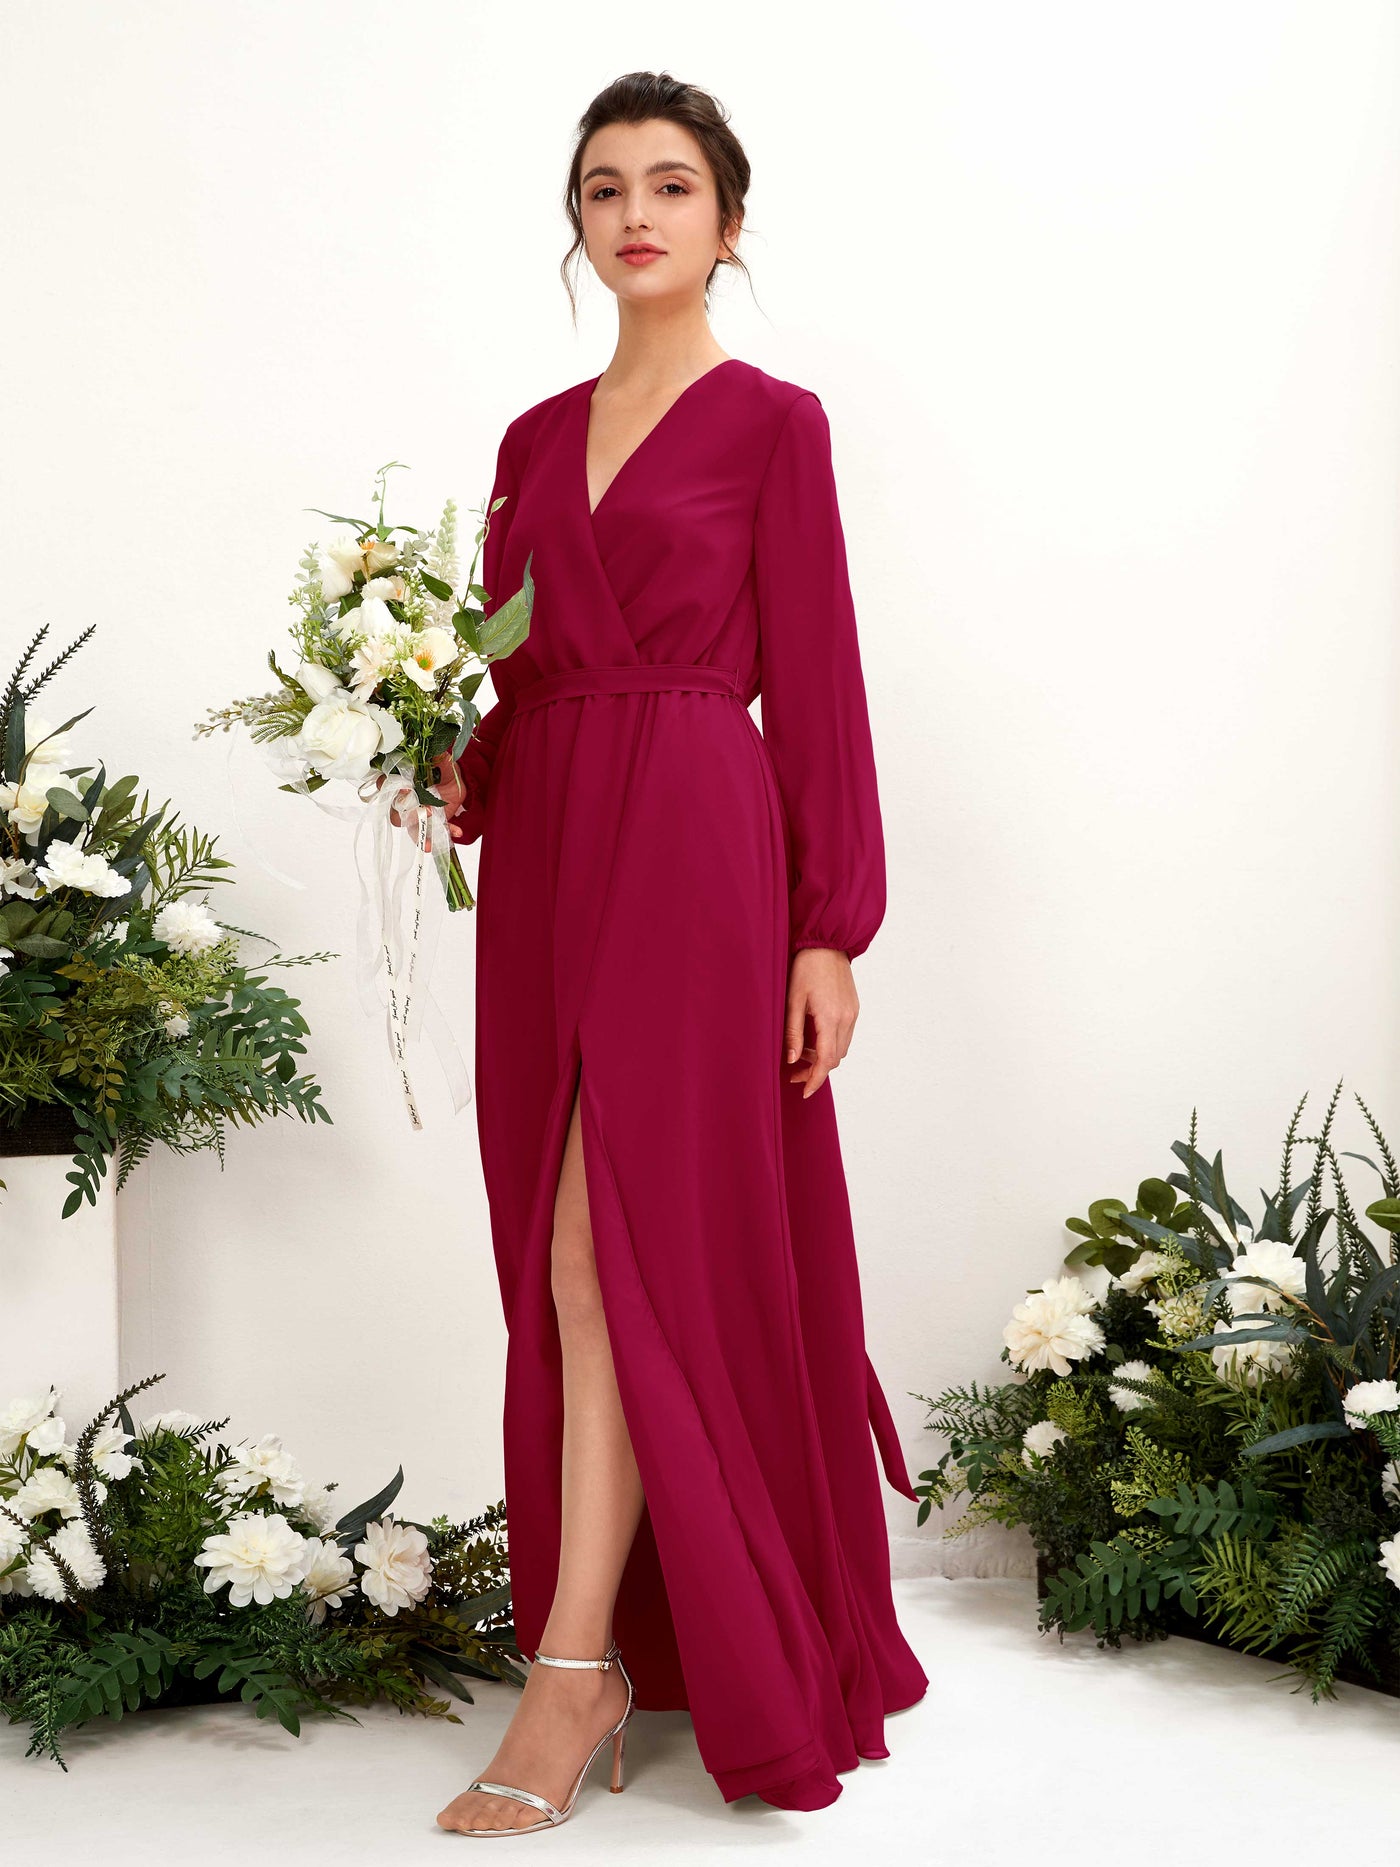 Jester Red Bridesmaid Dresses Bridesmaid Dress A-line Chiffon V-neck Full Length Long Sleeves Wedding Party Dress (81223241)#color_jester-red